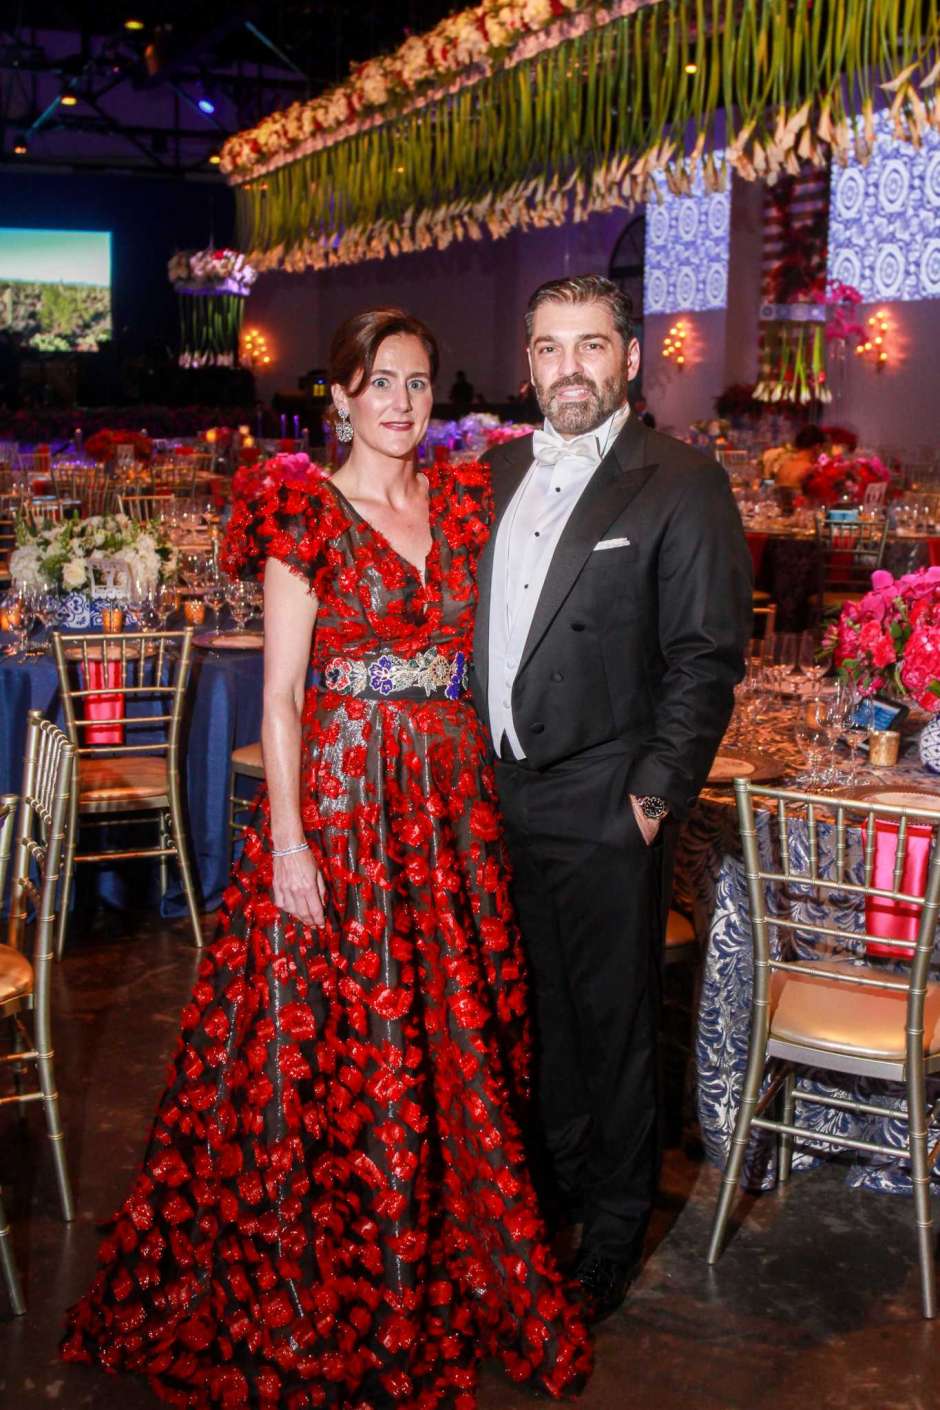 Marcia Vilas, a HGO opera chair, wearing a custom designed red floral embroidered V-neck gown by David Peck at the Houston Opera Ball.